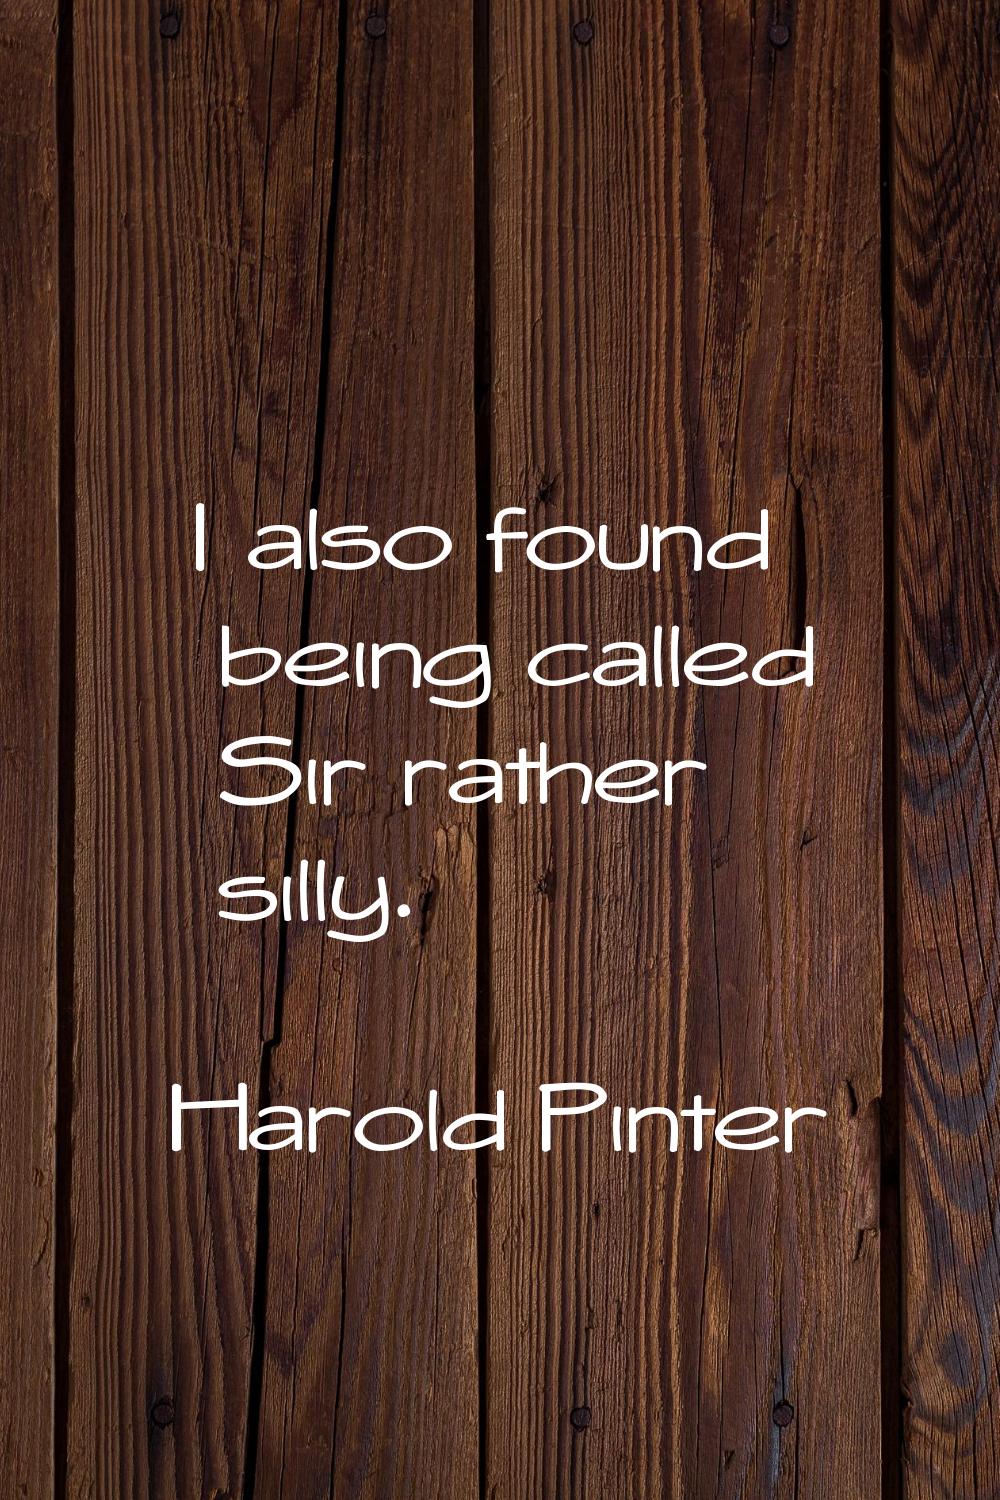 I also found being called Sir rather silly.